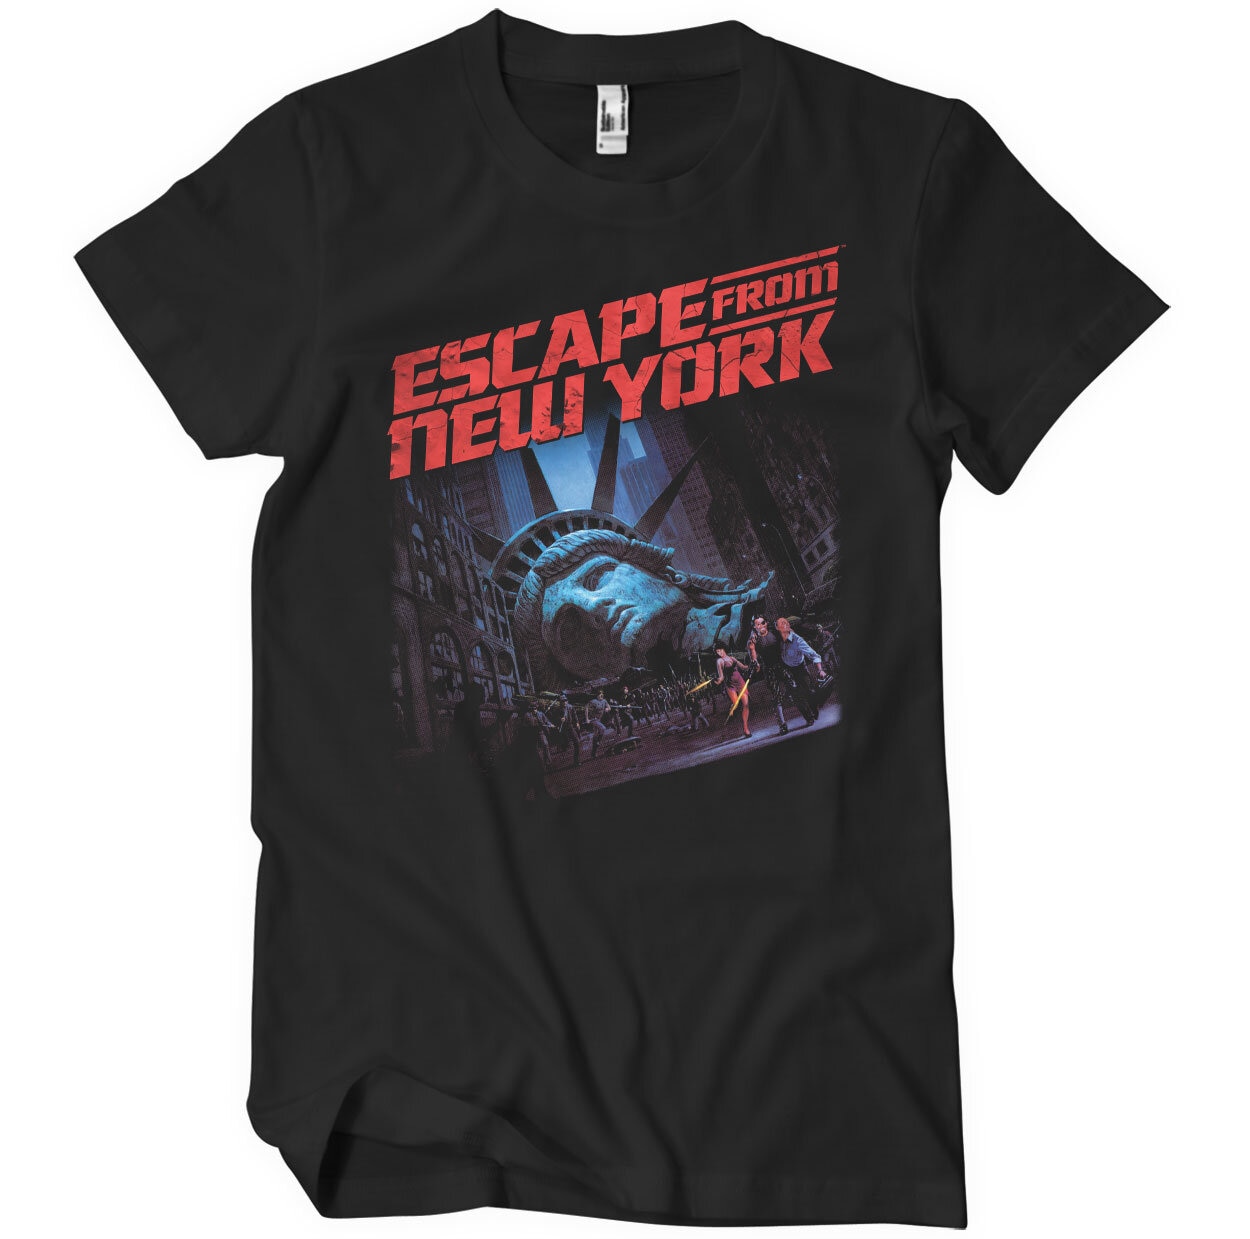 Escape From New York shirt - Classic Filmposter